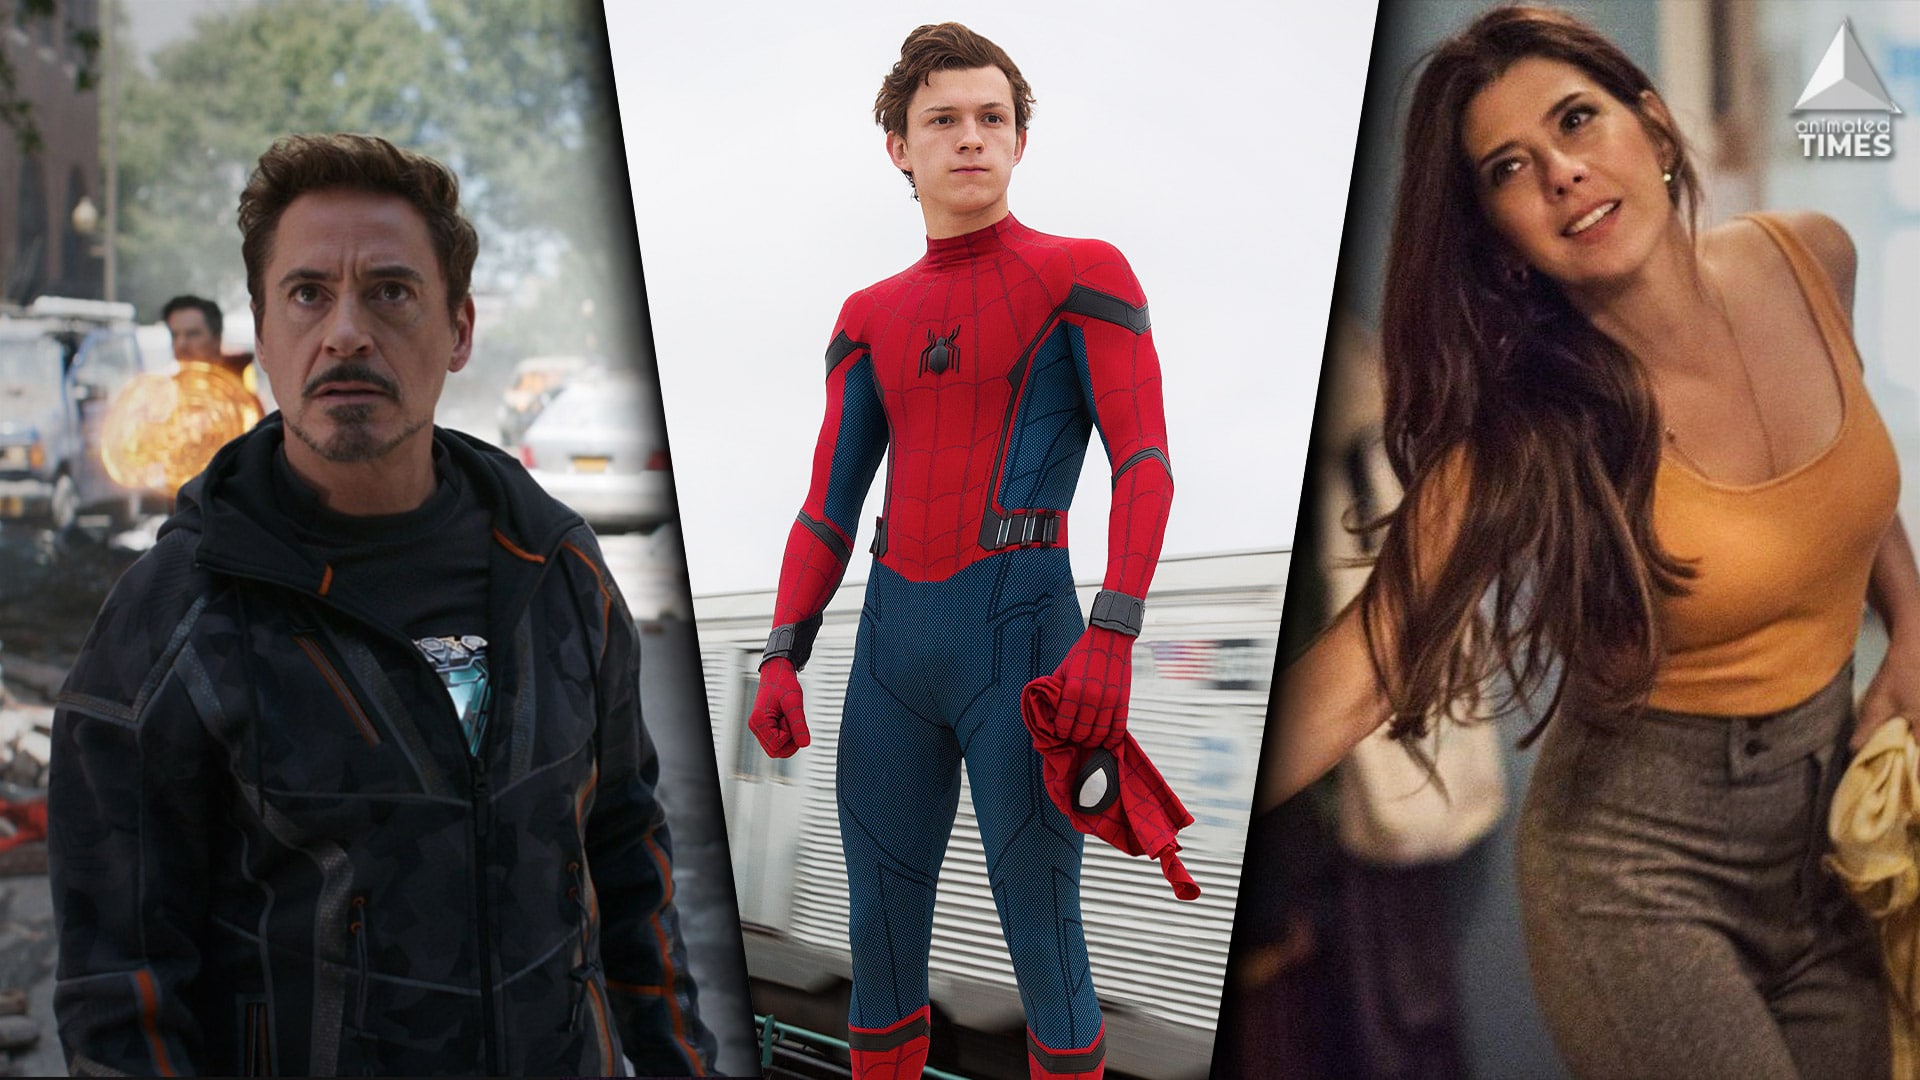 MCU Spider-Man 3: Glaring Far From Home Mistakes That Need To Be Avoided